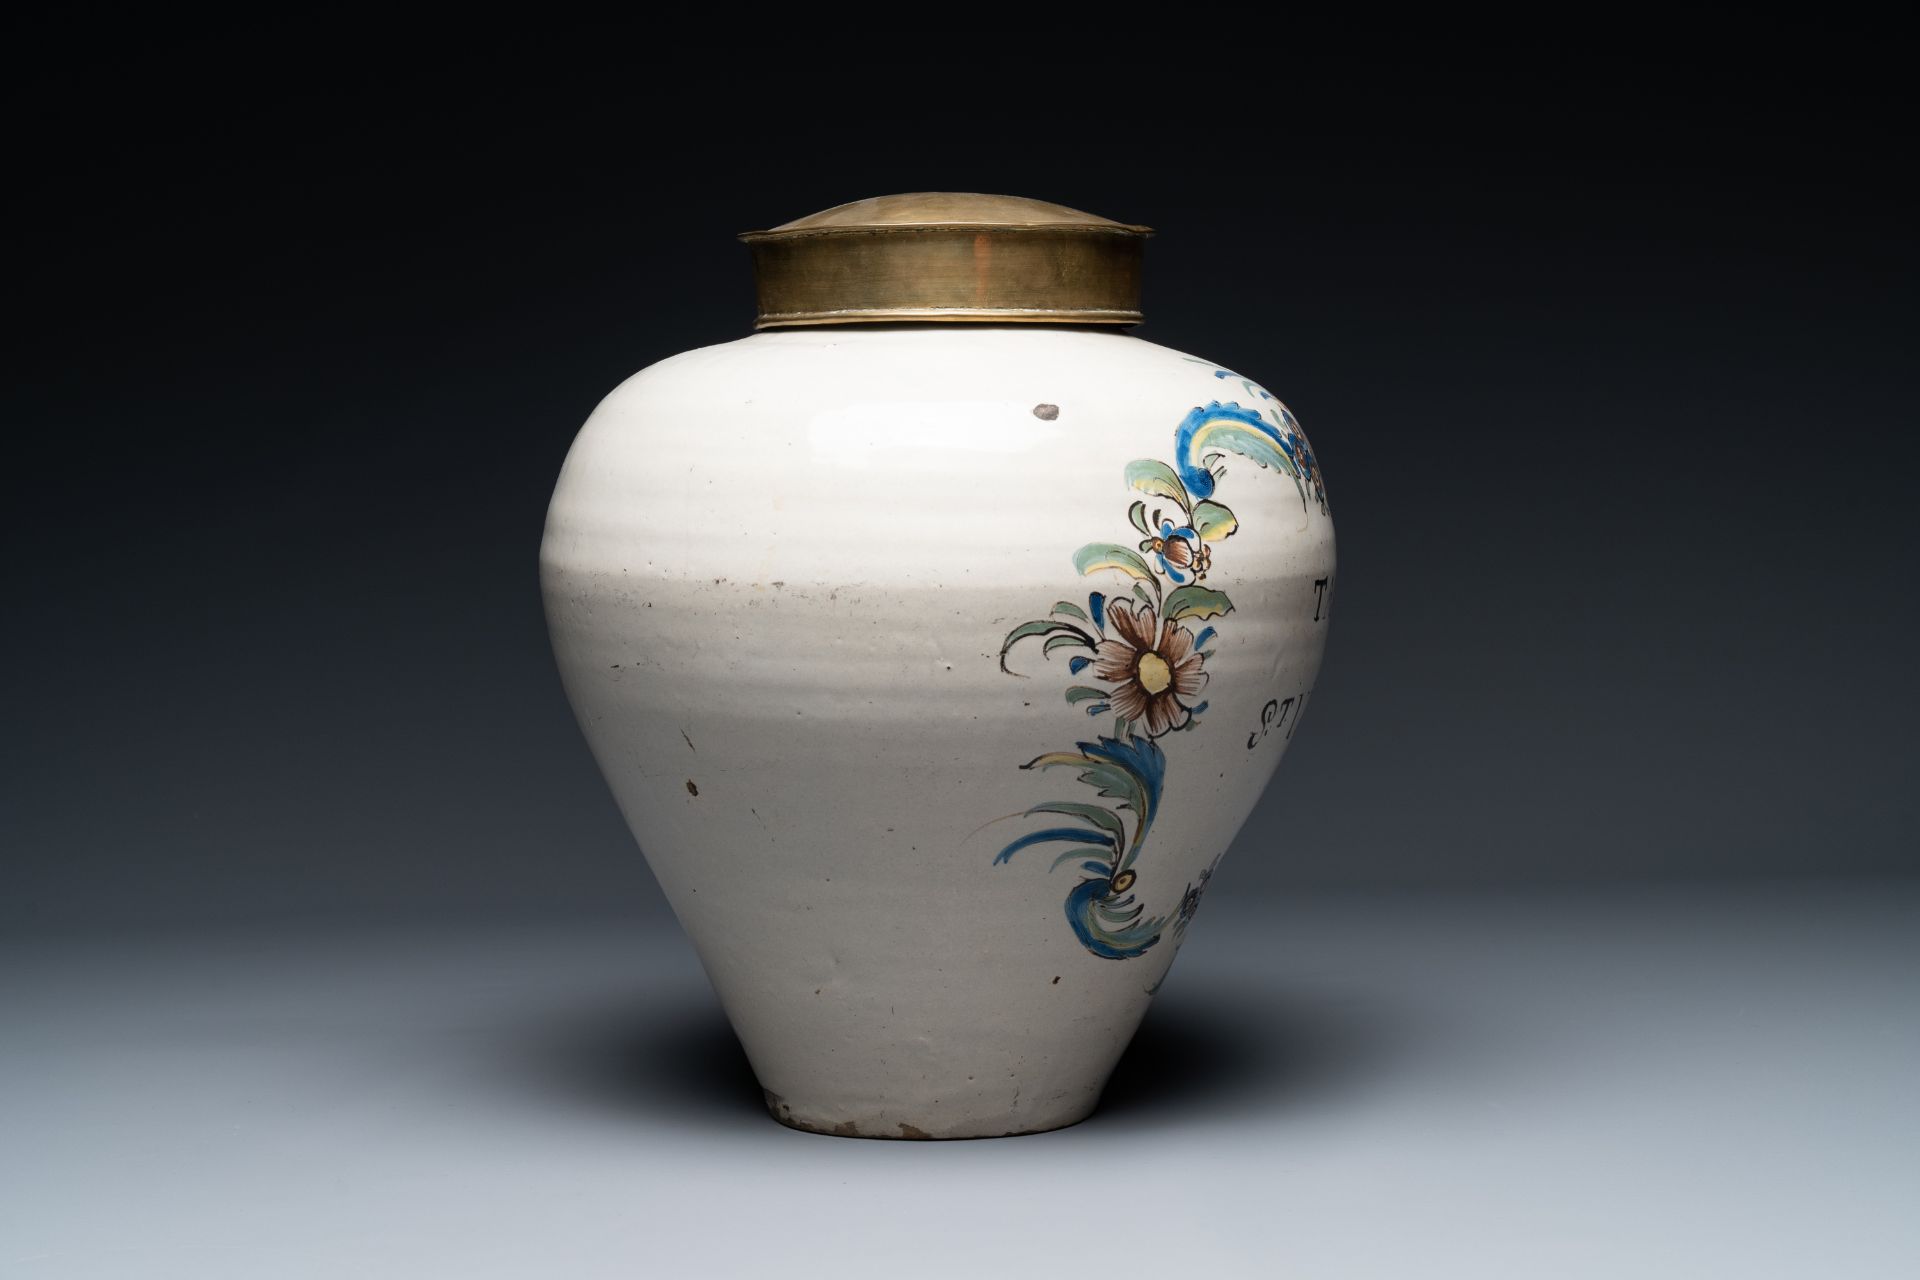 A polychrome pottery 'St. Vincent' tobacco jar, France, 18th century - Image 12 of 19